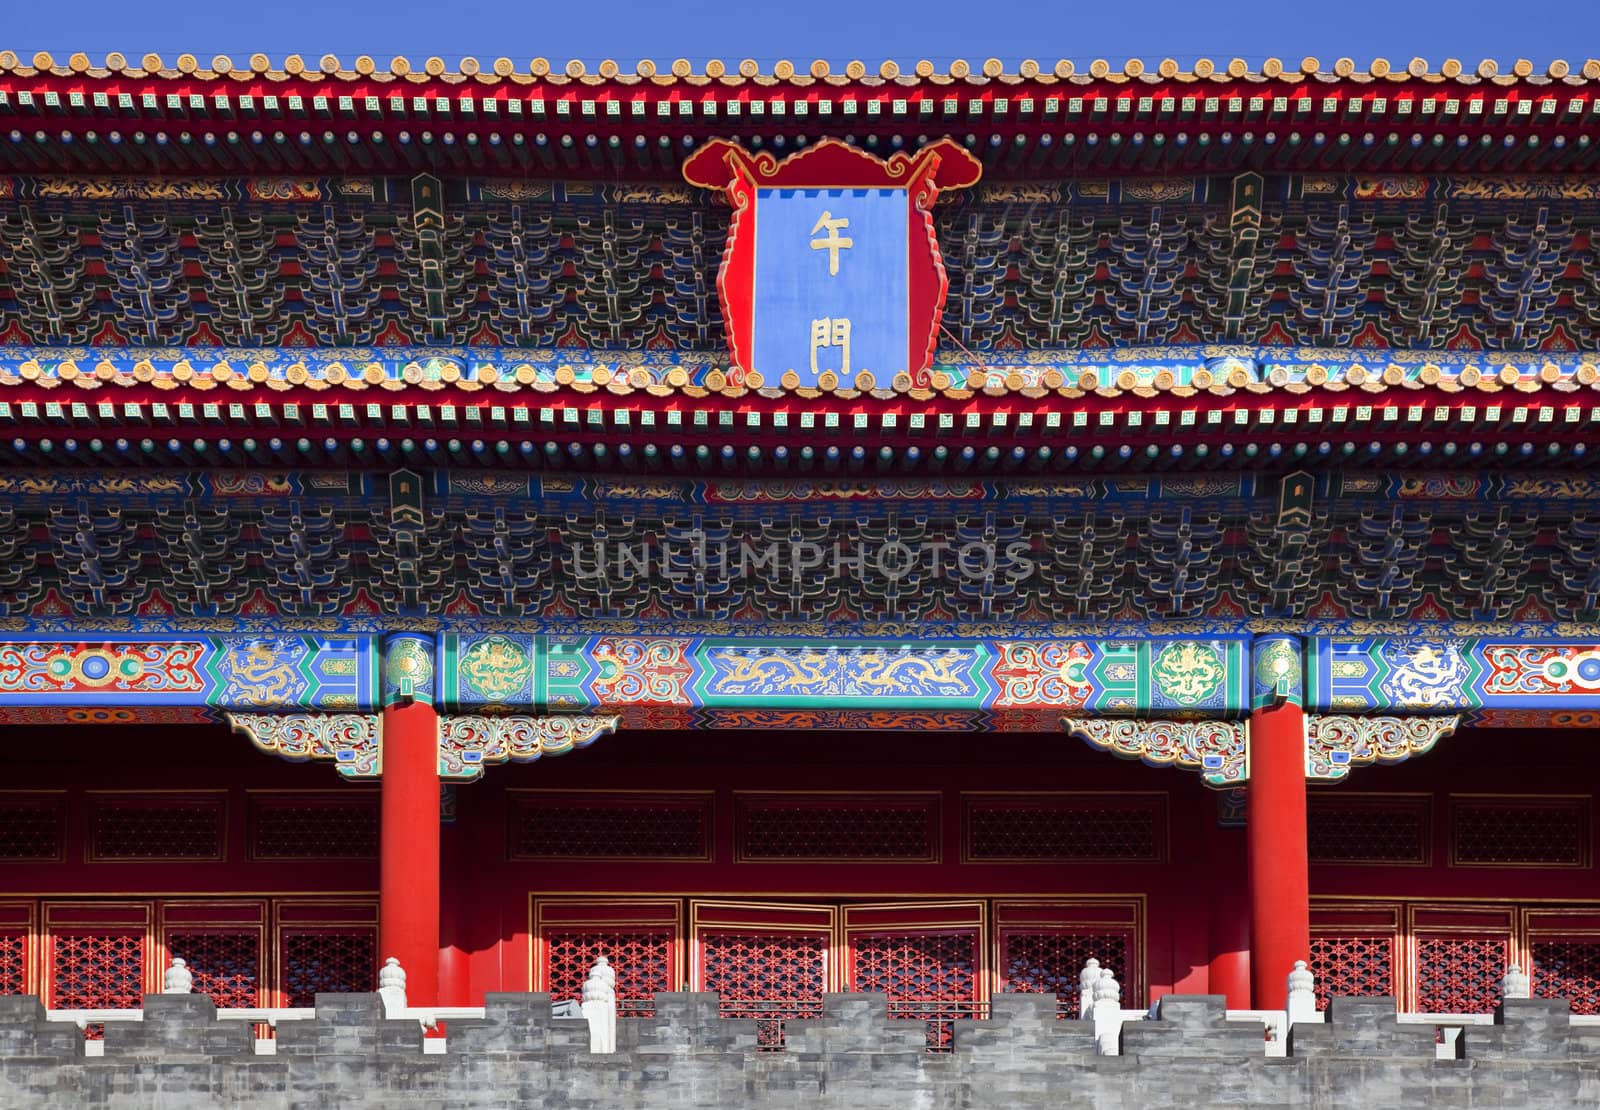 Gugong Forbidden City Palace Beijing China by bill_perry